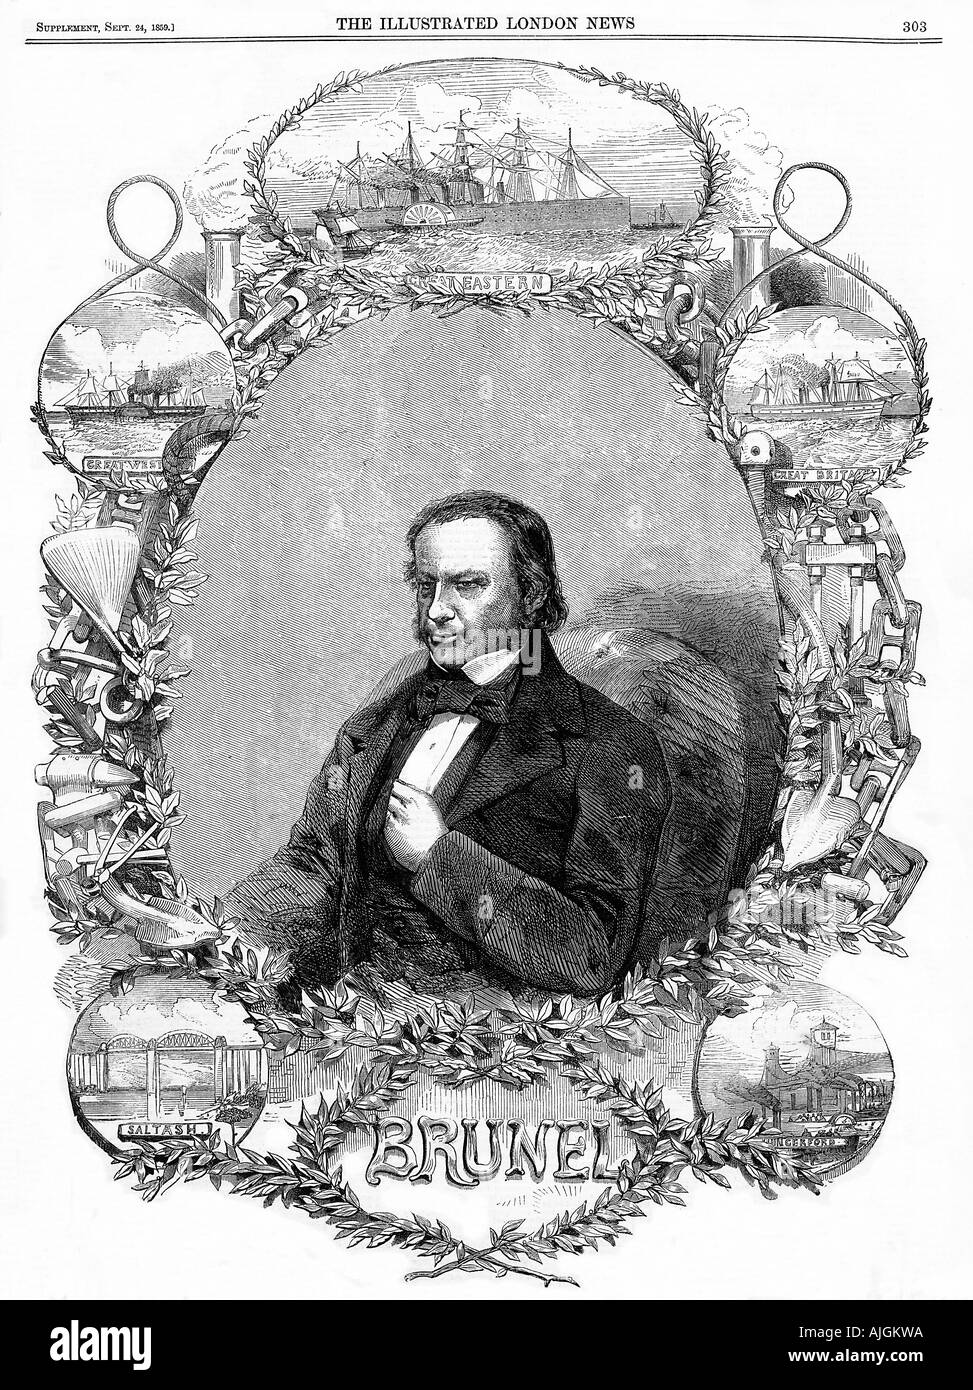 Brunel Obituary 1859 , portrait of the legendary engineer surrounded by illustrations of his greatest achievements Stock Photo